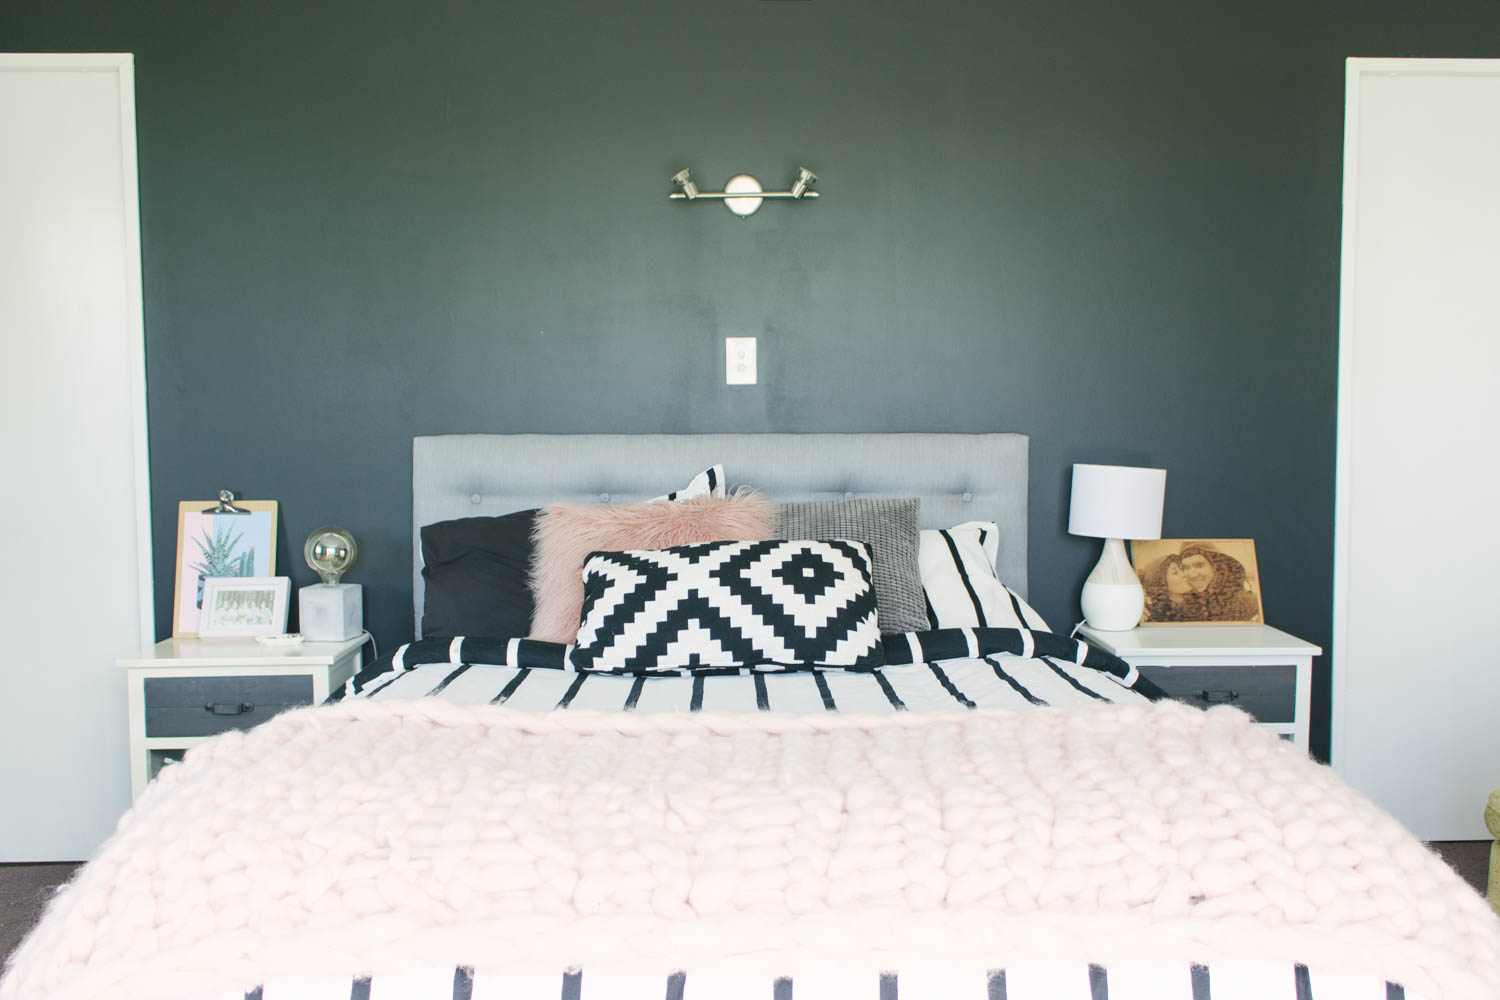 Make your own DIY upholstered headboard for less than $100!! Easy peasy.